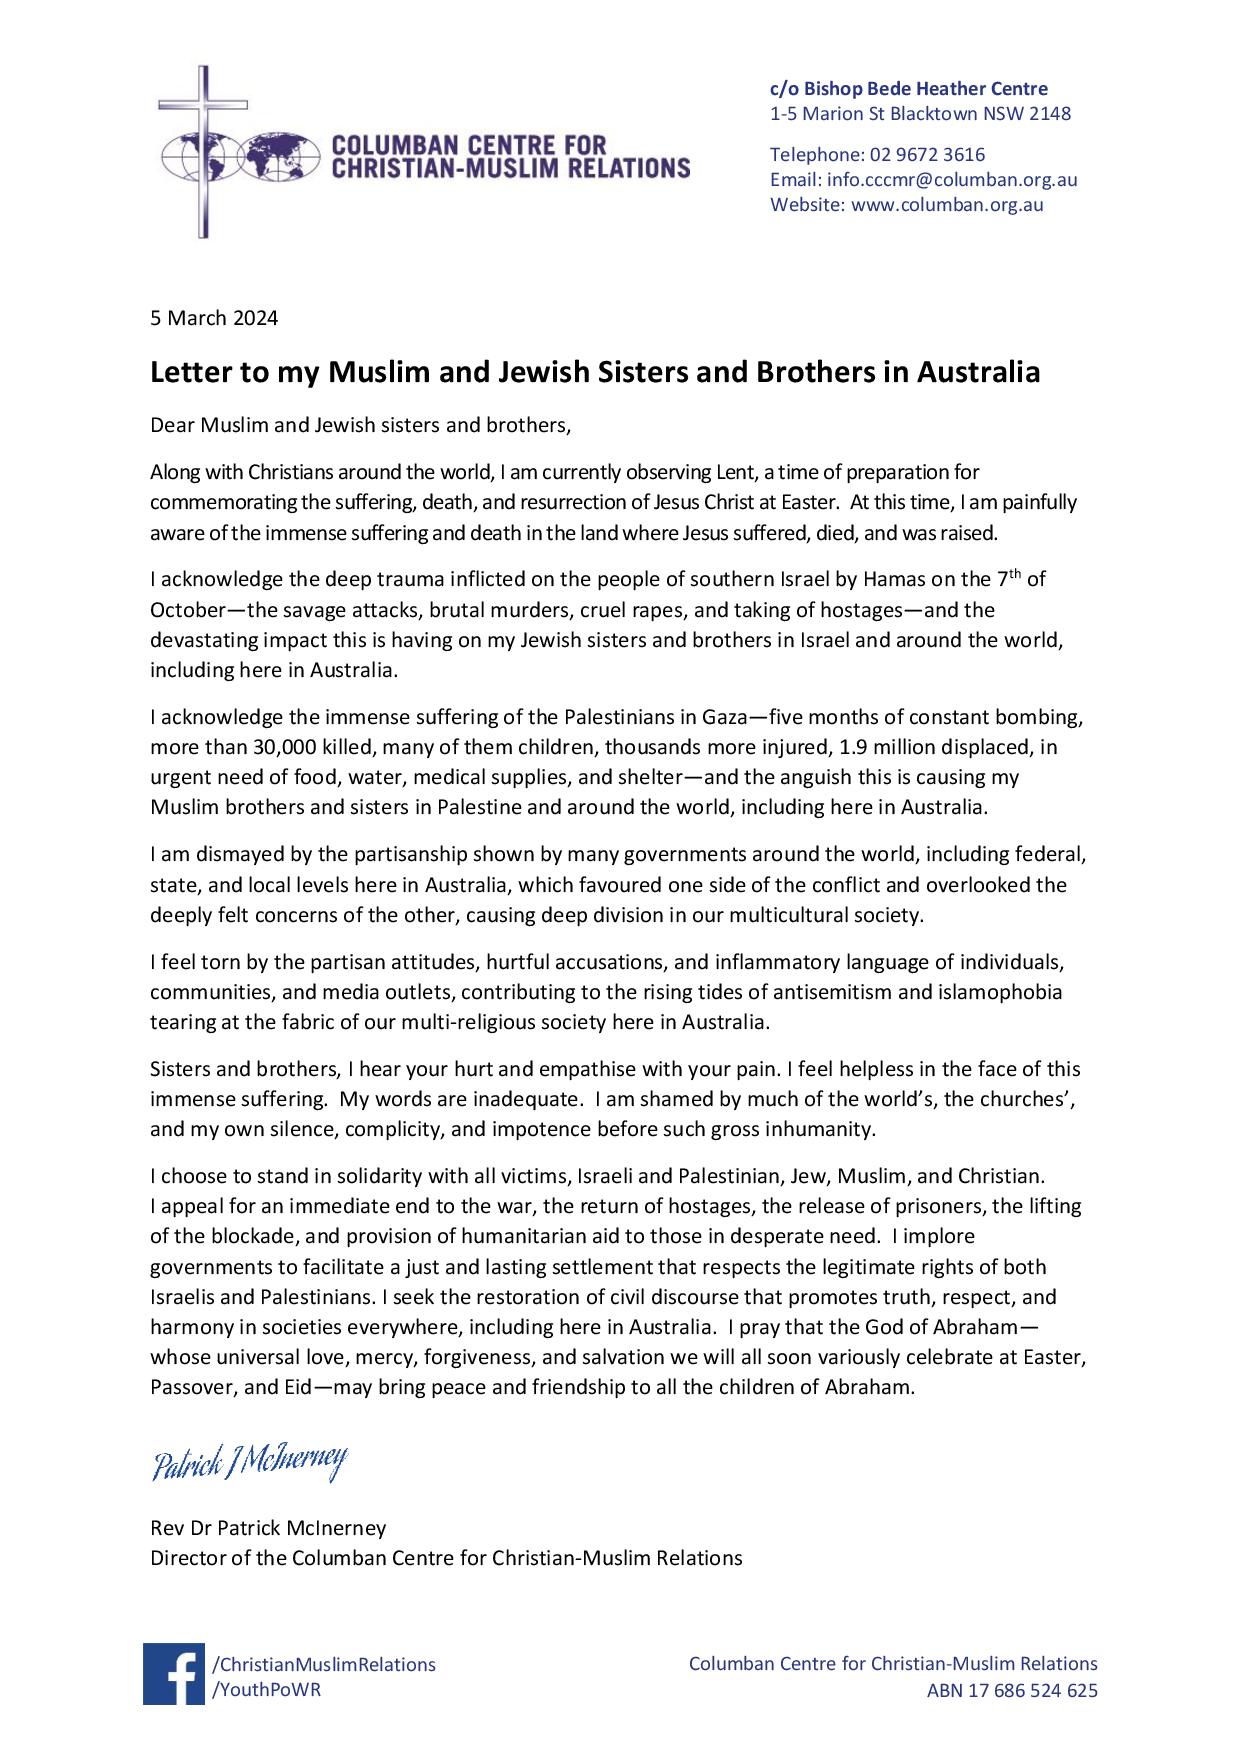 Letter to My Muslim and Jewish Sisters and Brothers in Australia